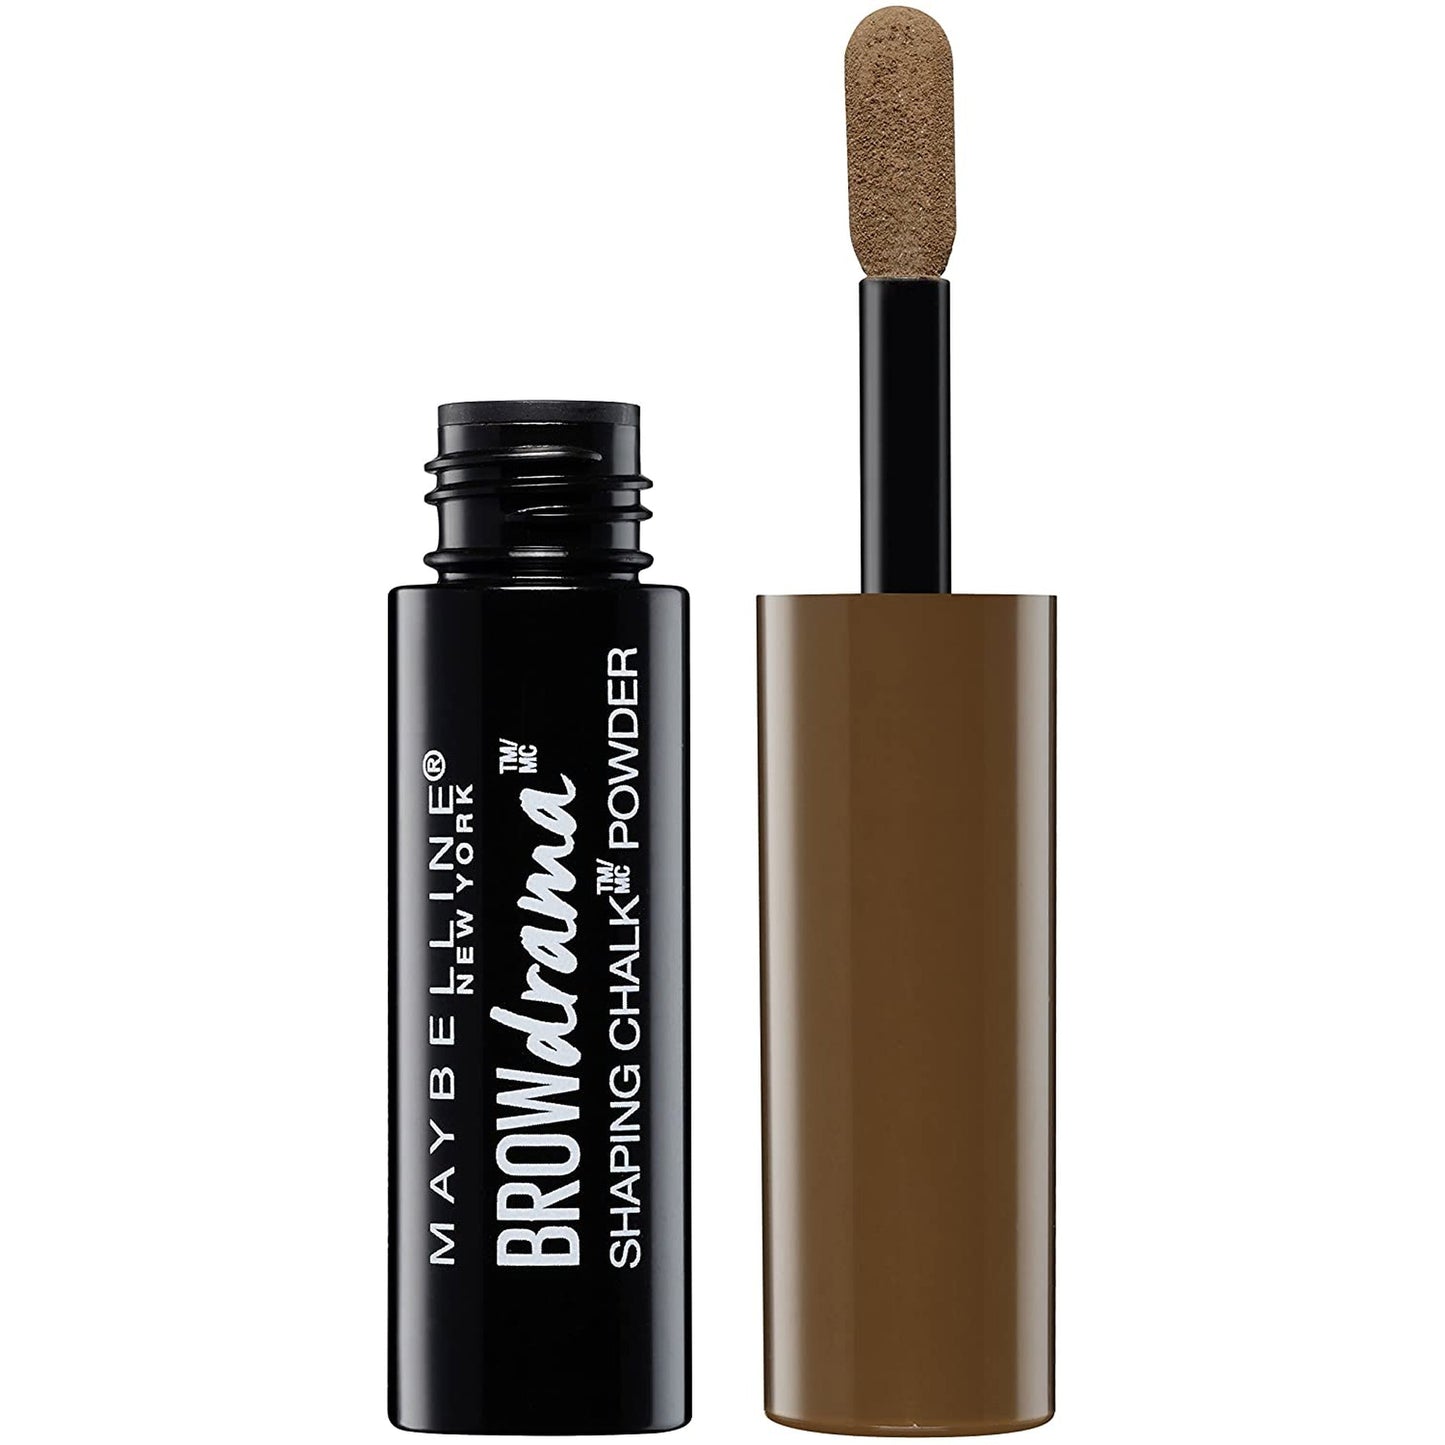 Maybelline Brow Drama Shaping Chalk Powder 130 Deep Brown-Maybelline-BeautyNmakeup.co.uk